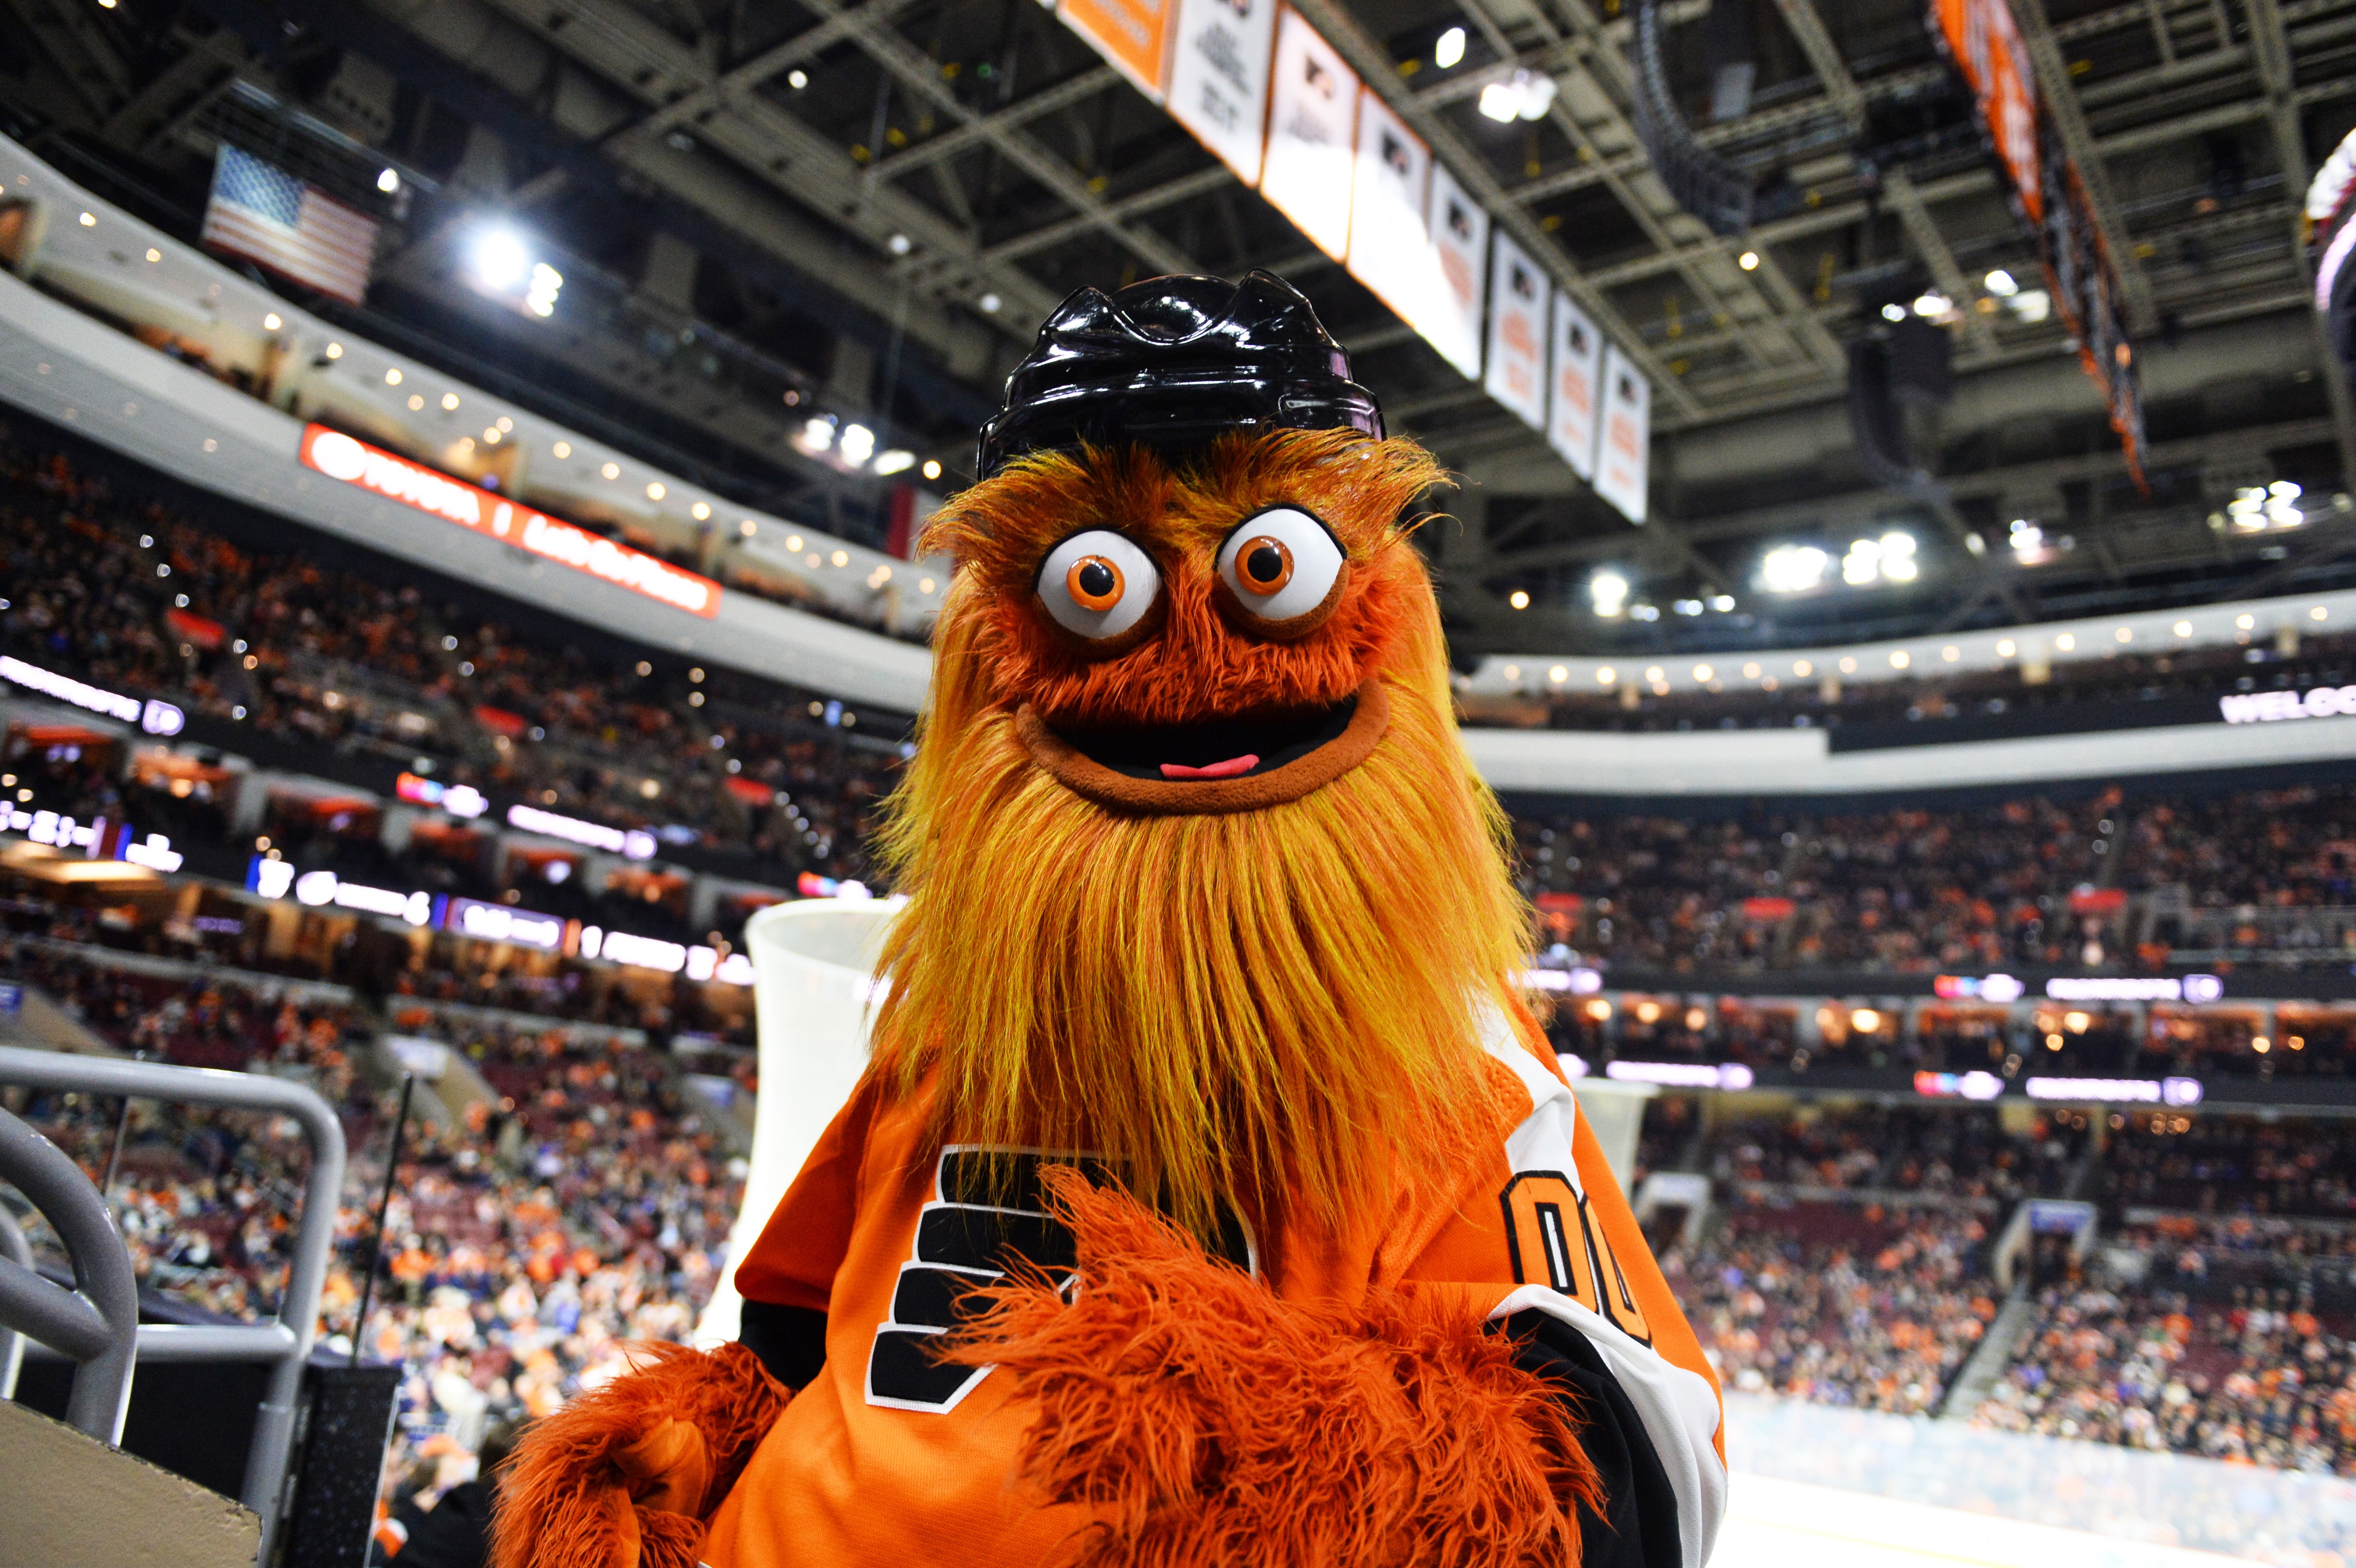 Gritty vindicated: Philadelphia Flyers mascot cleared of punching